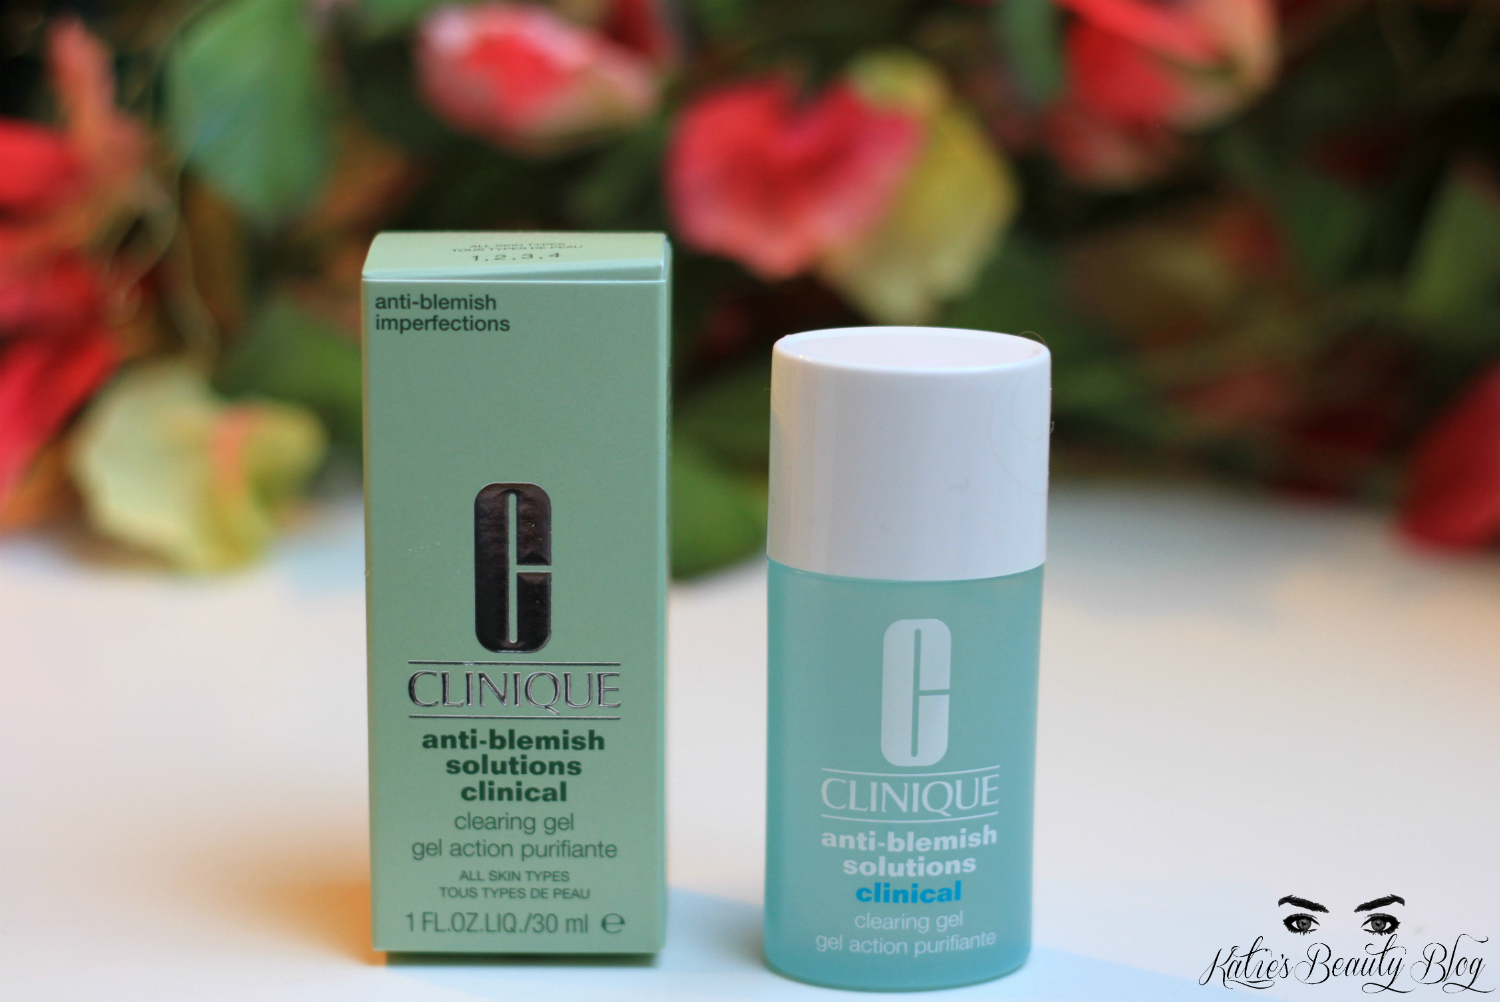 Chemicaliën zonlicht Atticus REVIEW: Anti-Blemish Solutions Clinical Clearing Gel - Katie Snooks